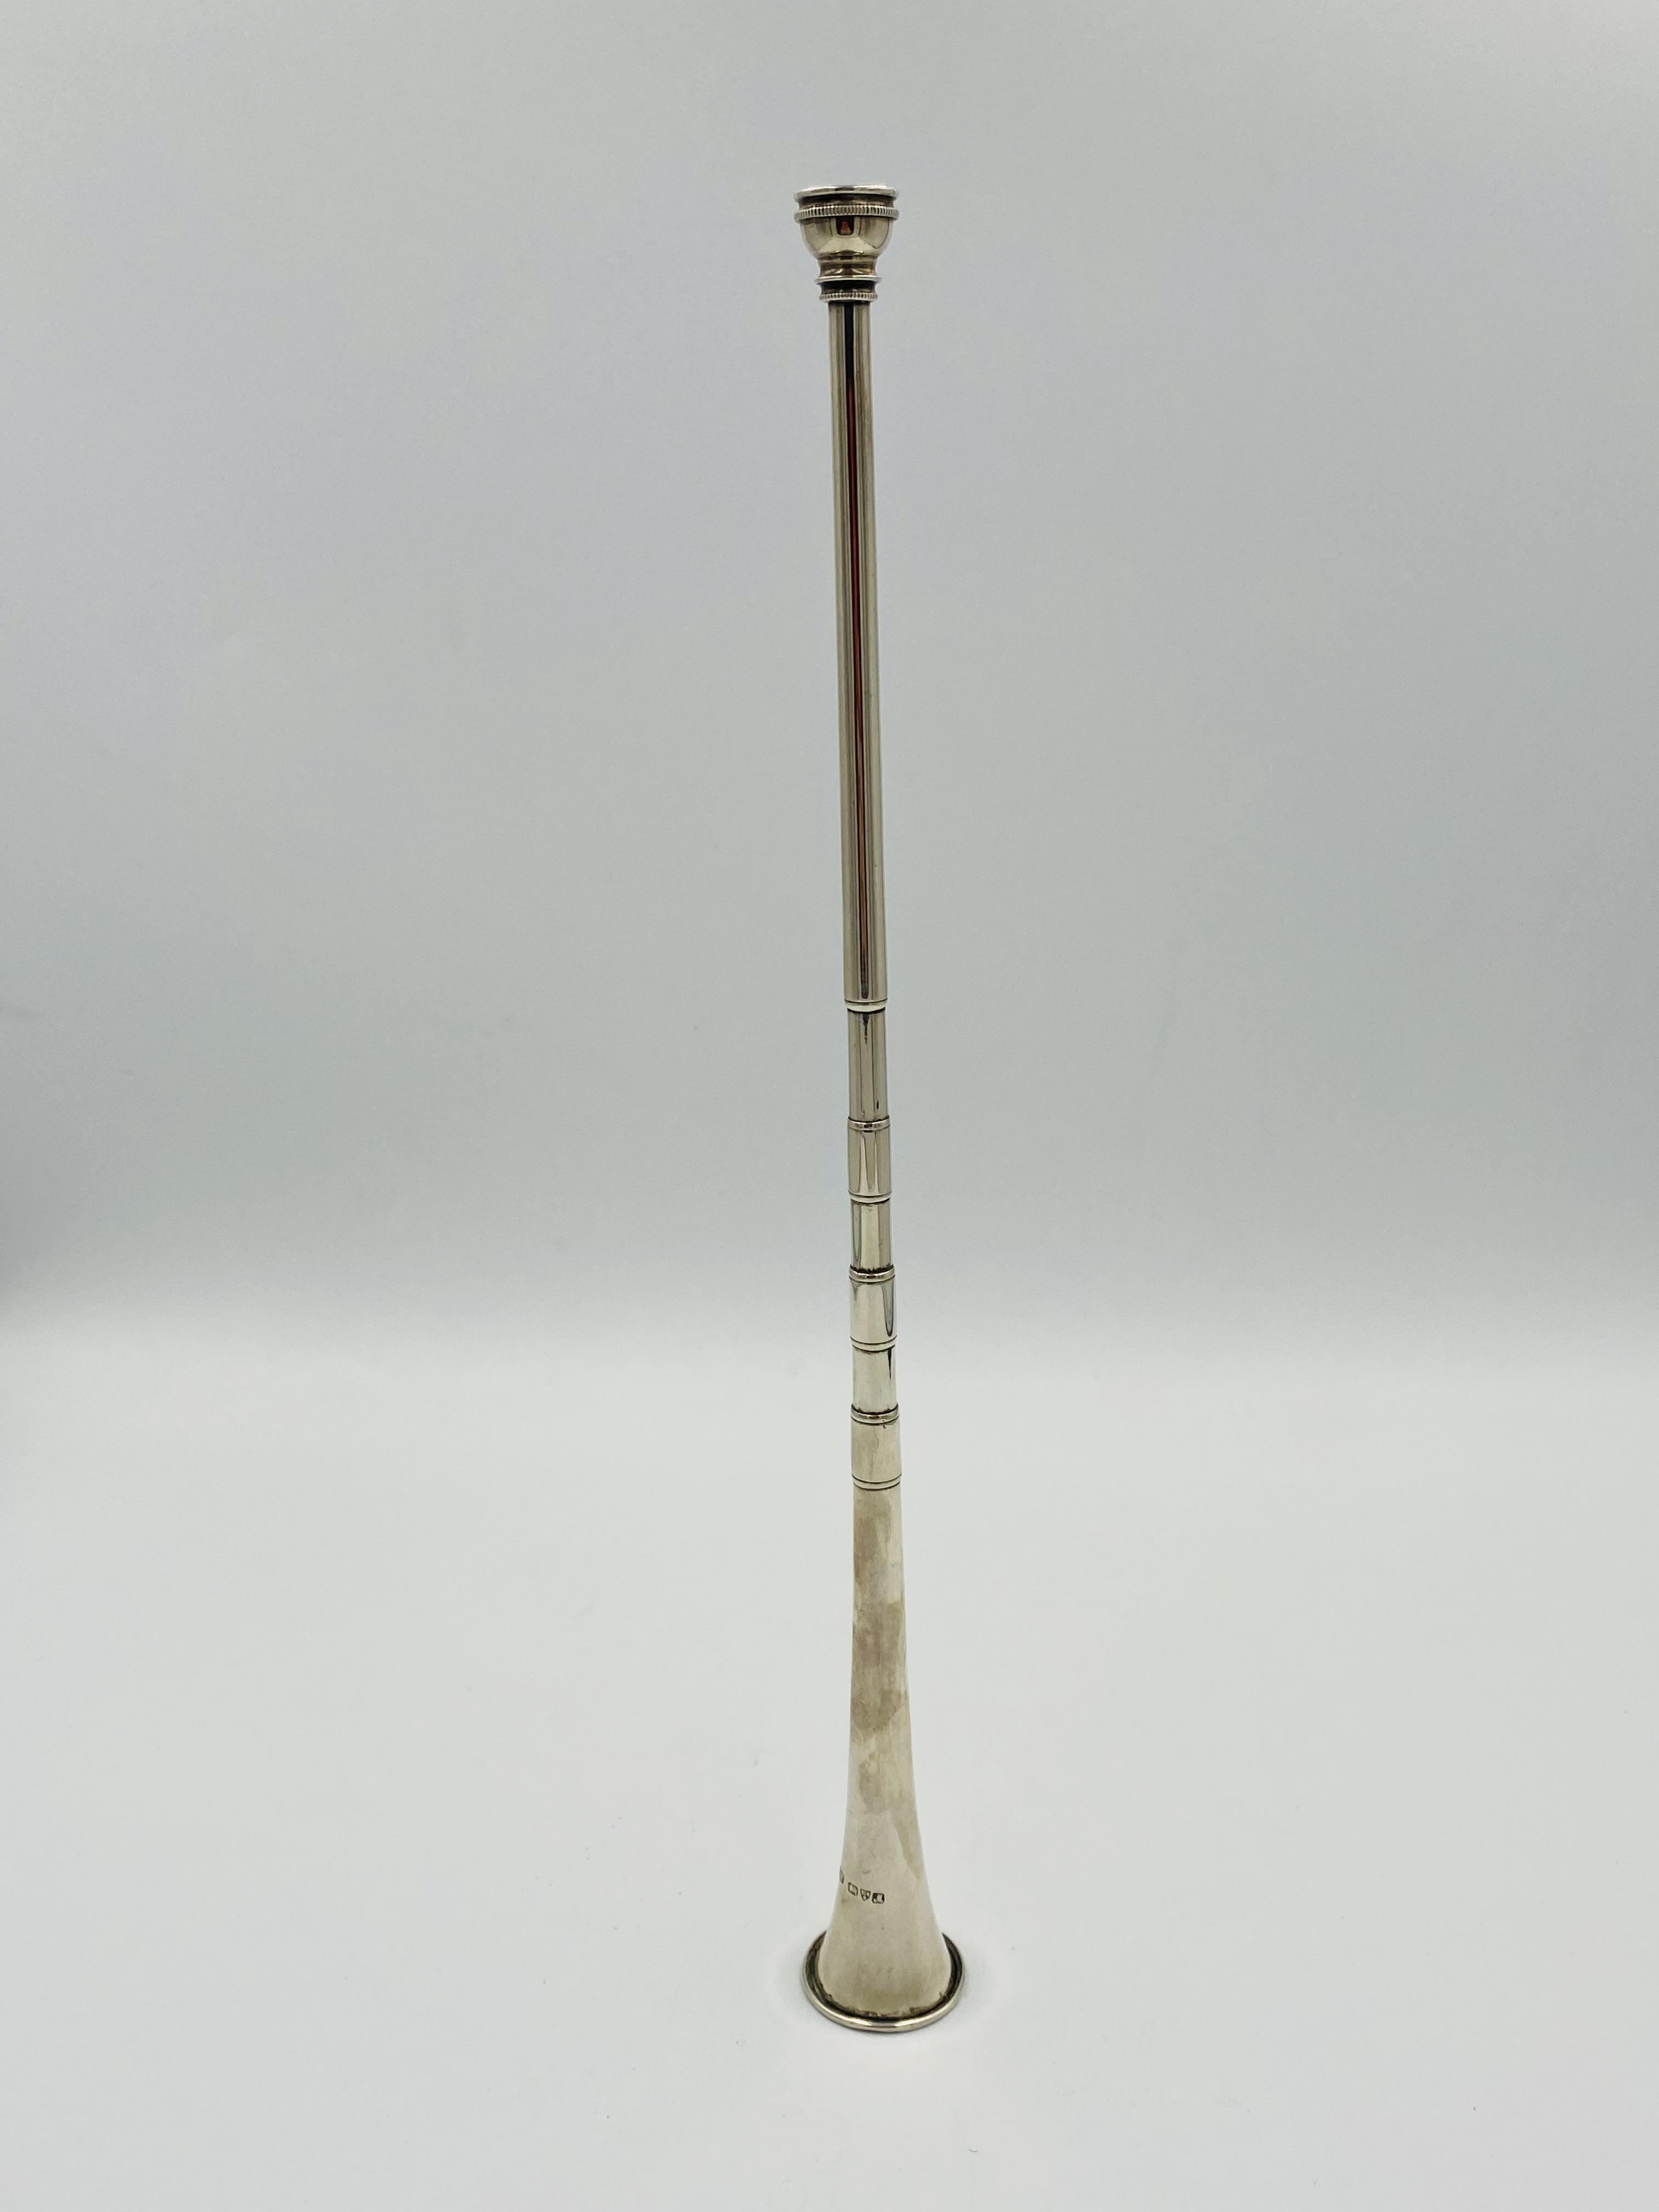 Hallmarked silver horn - Image 3 of 6